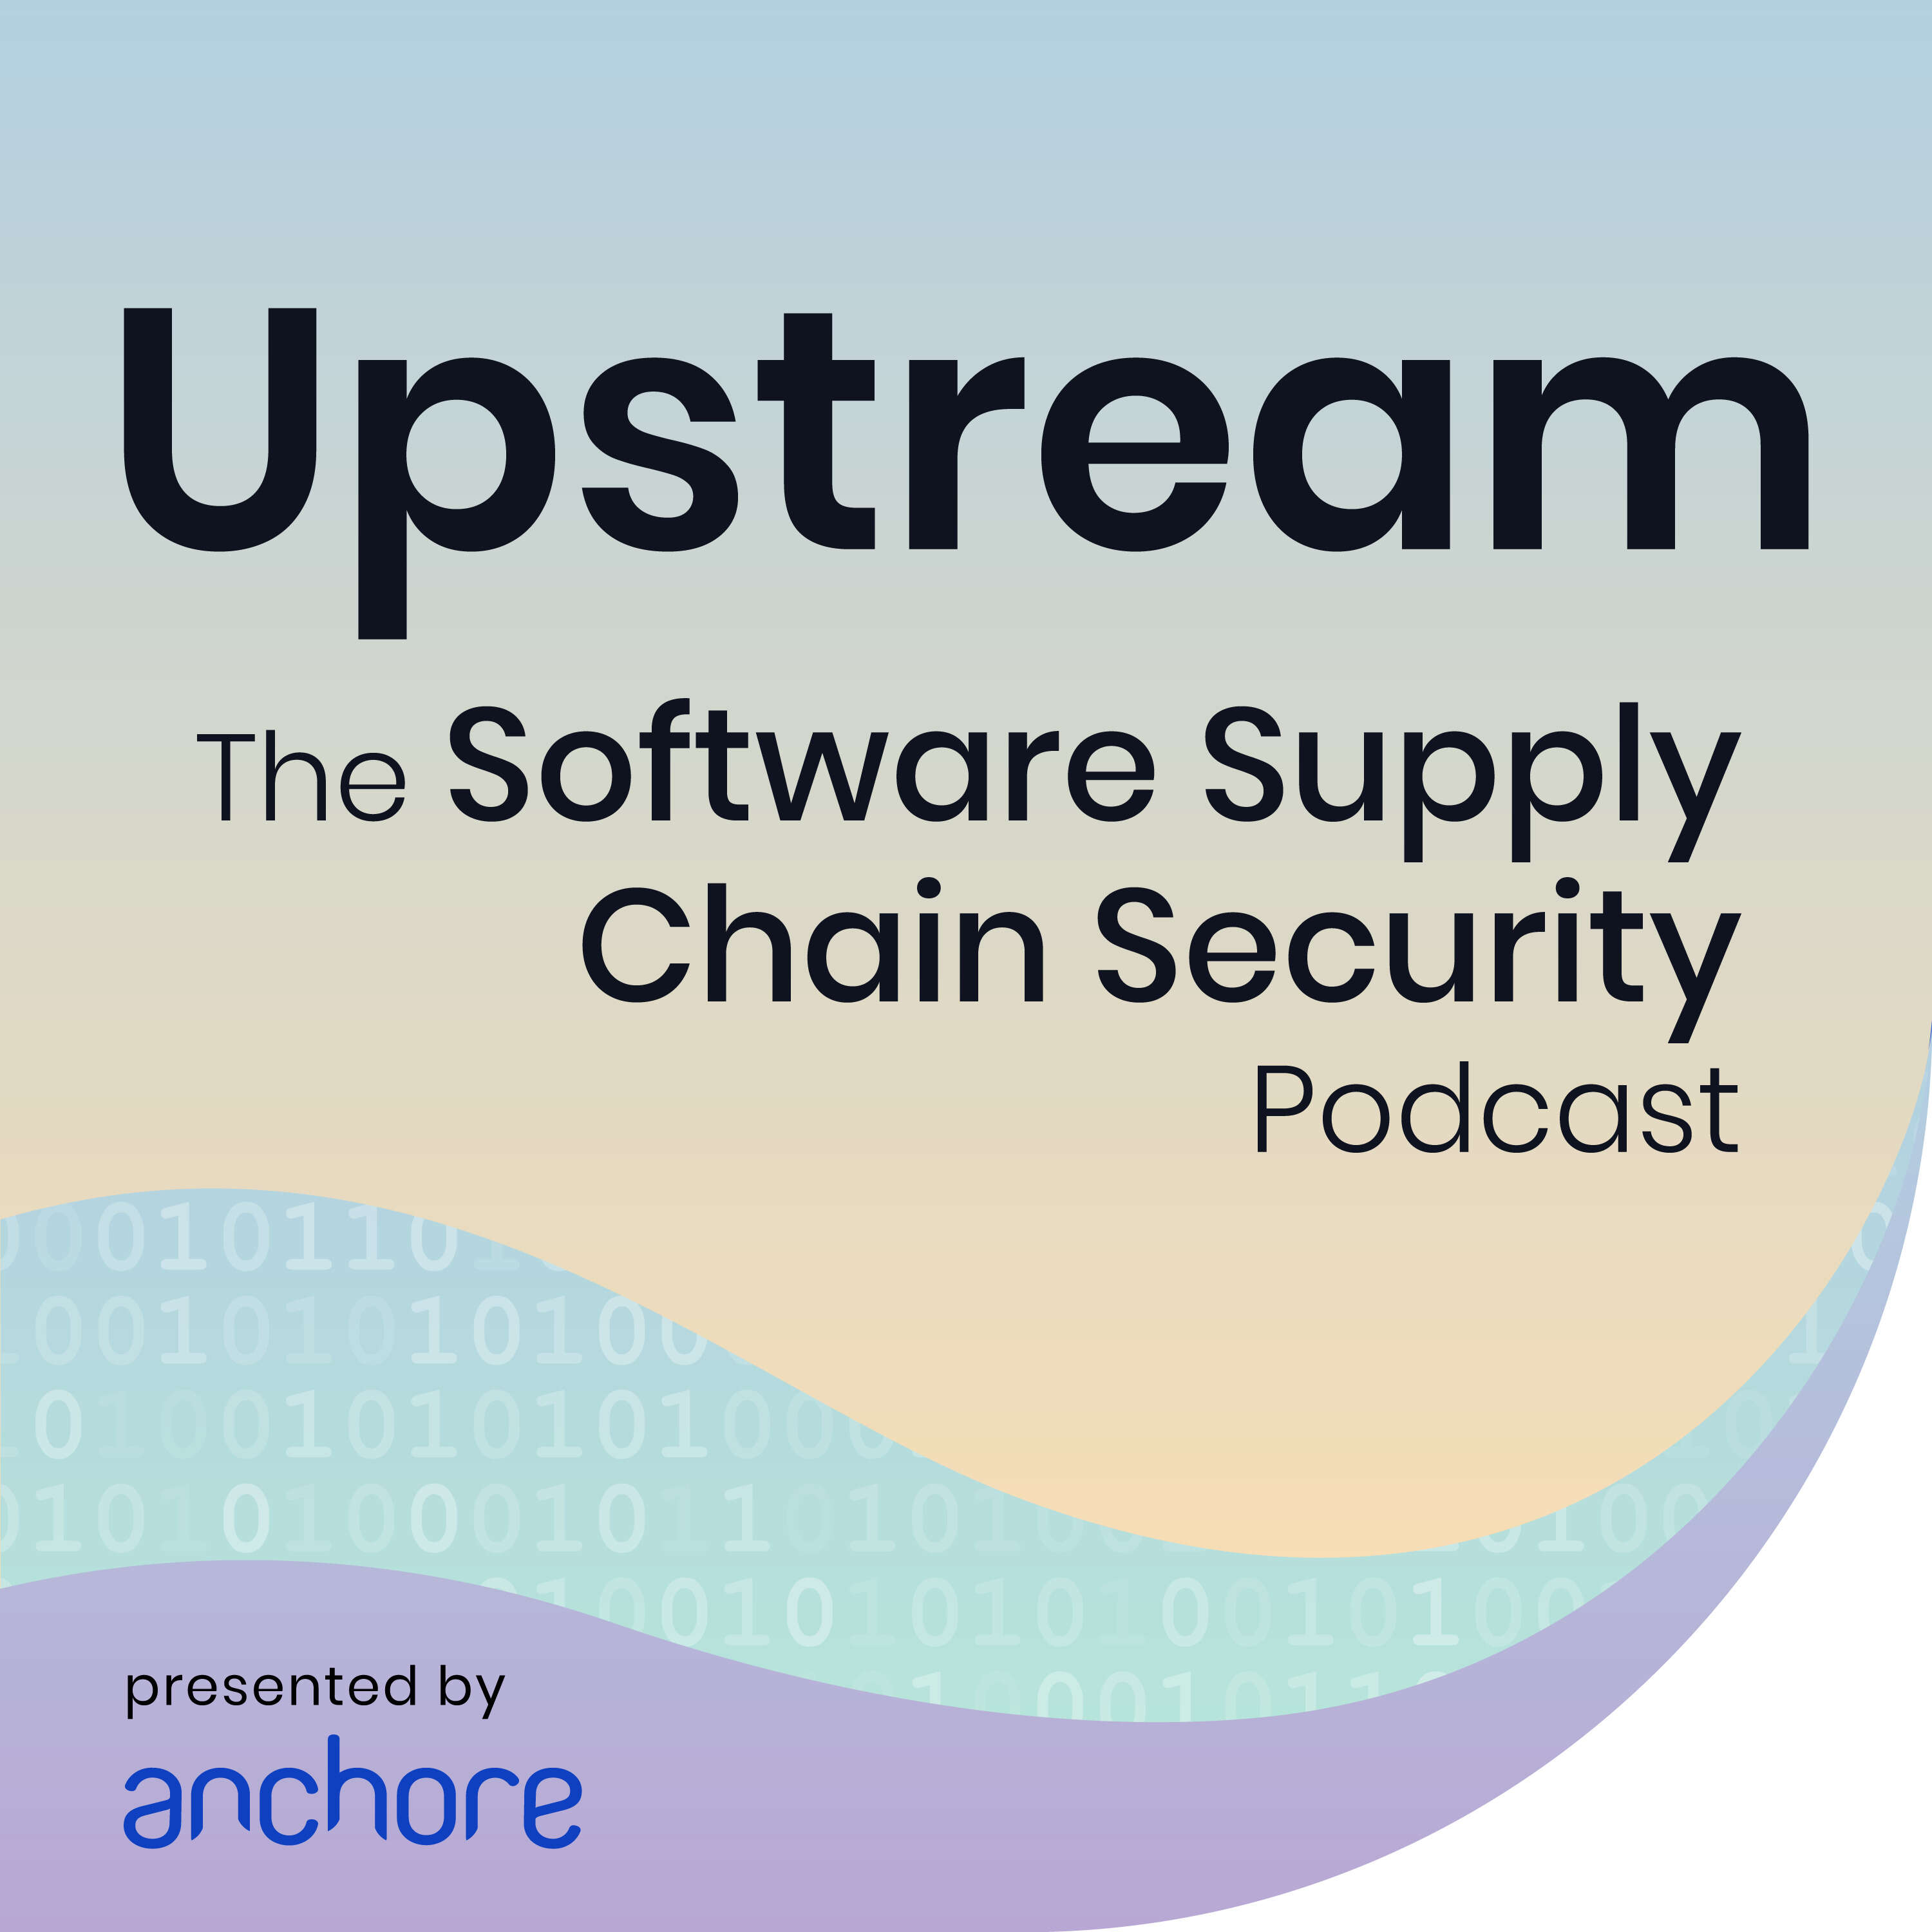 Upstream: The Software Supply Chain Security Podcast presented by Anchore